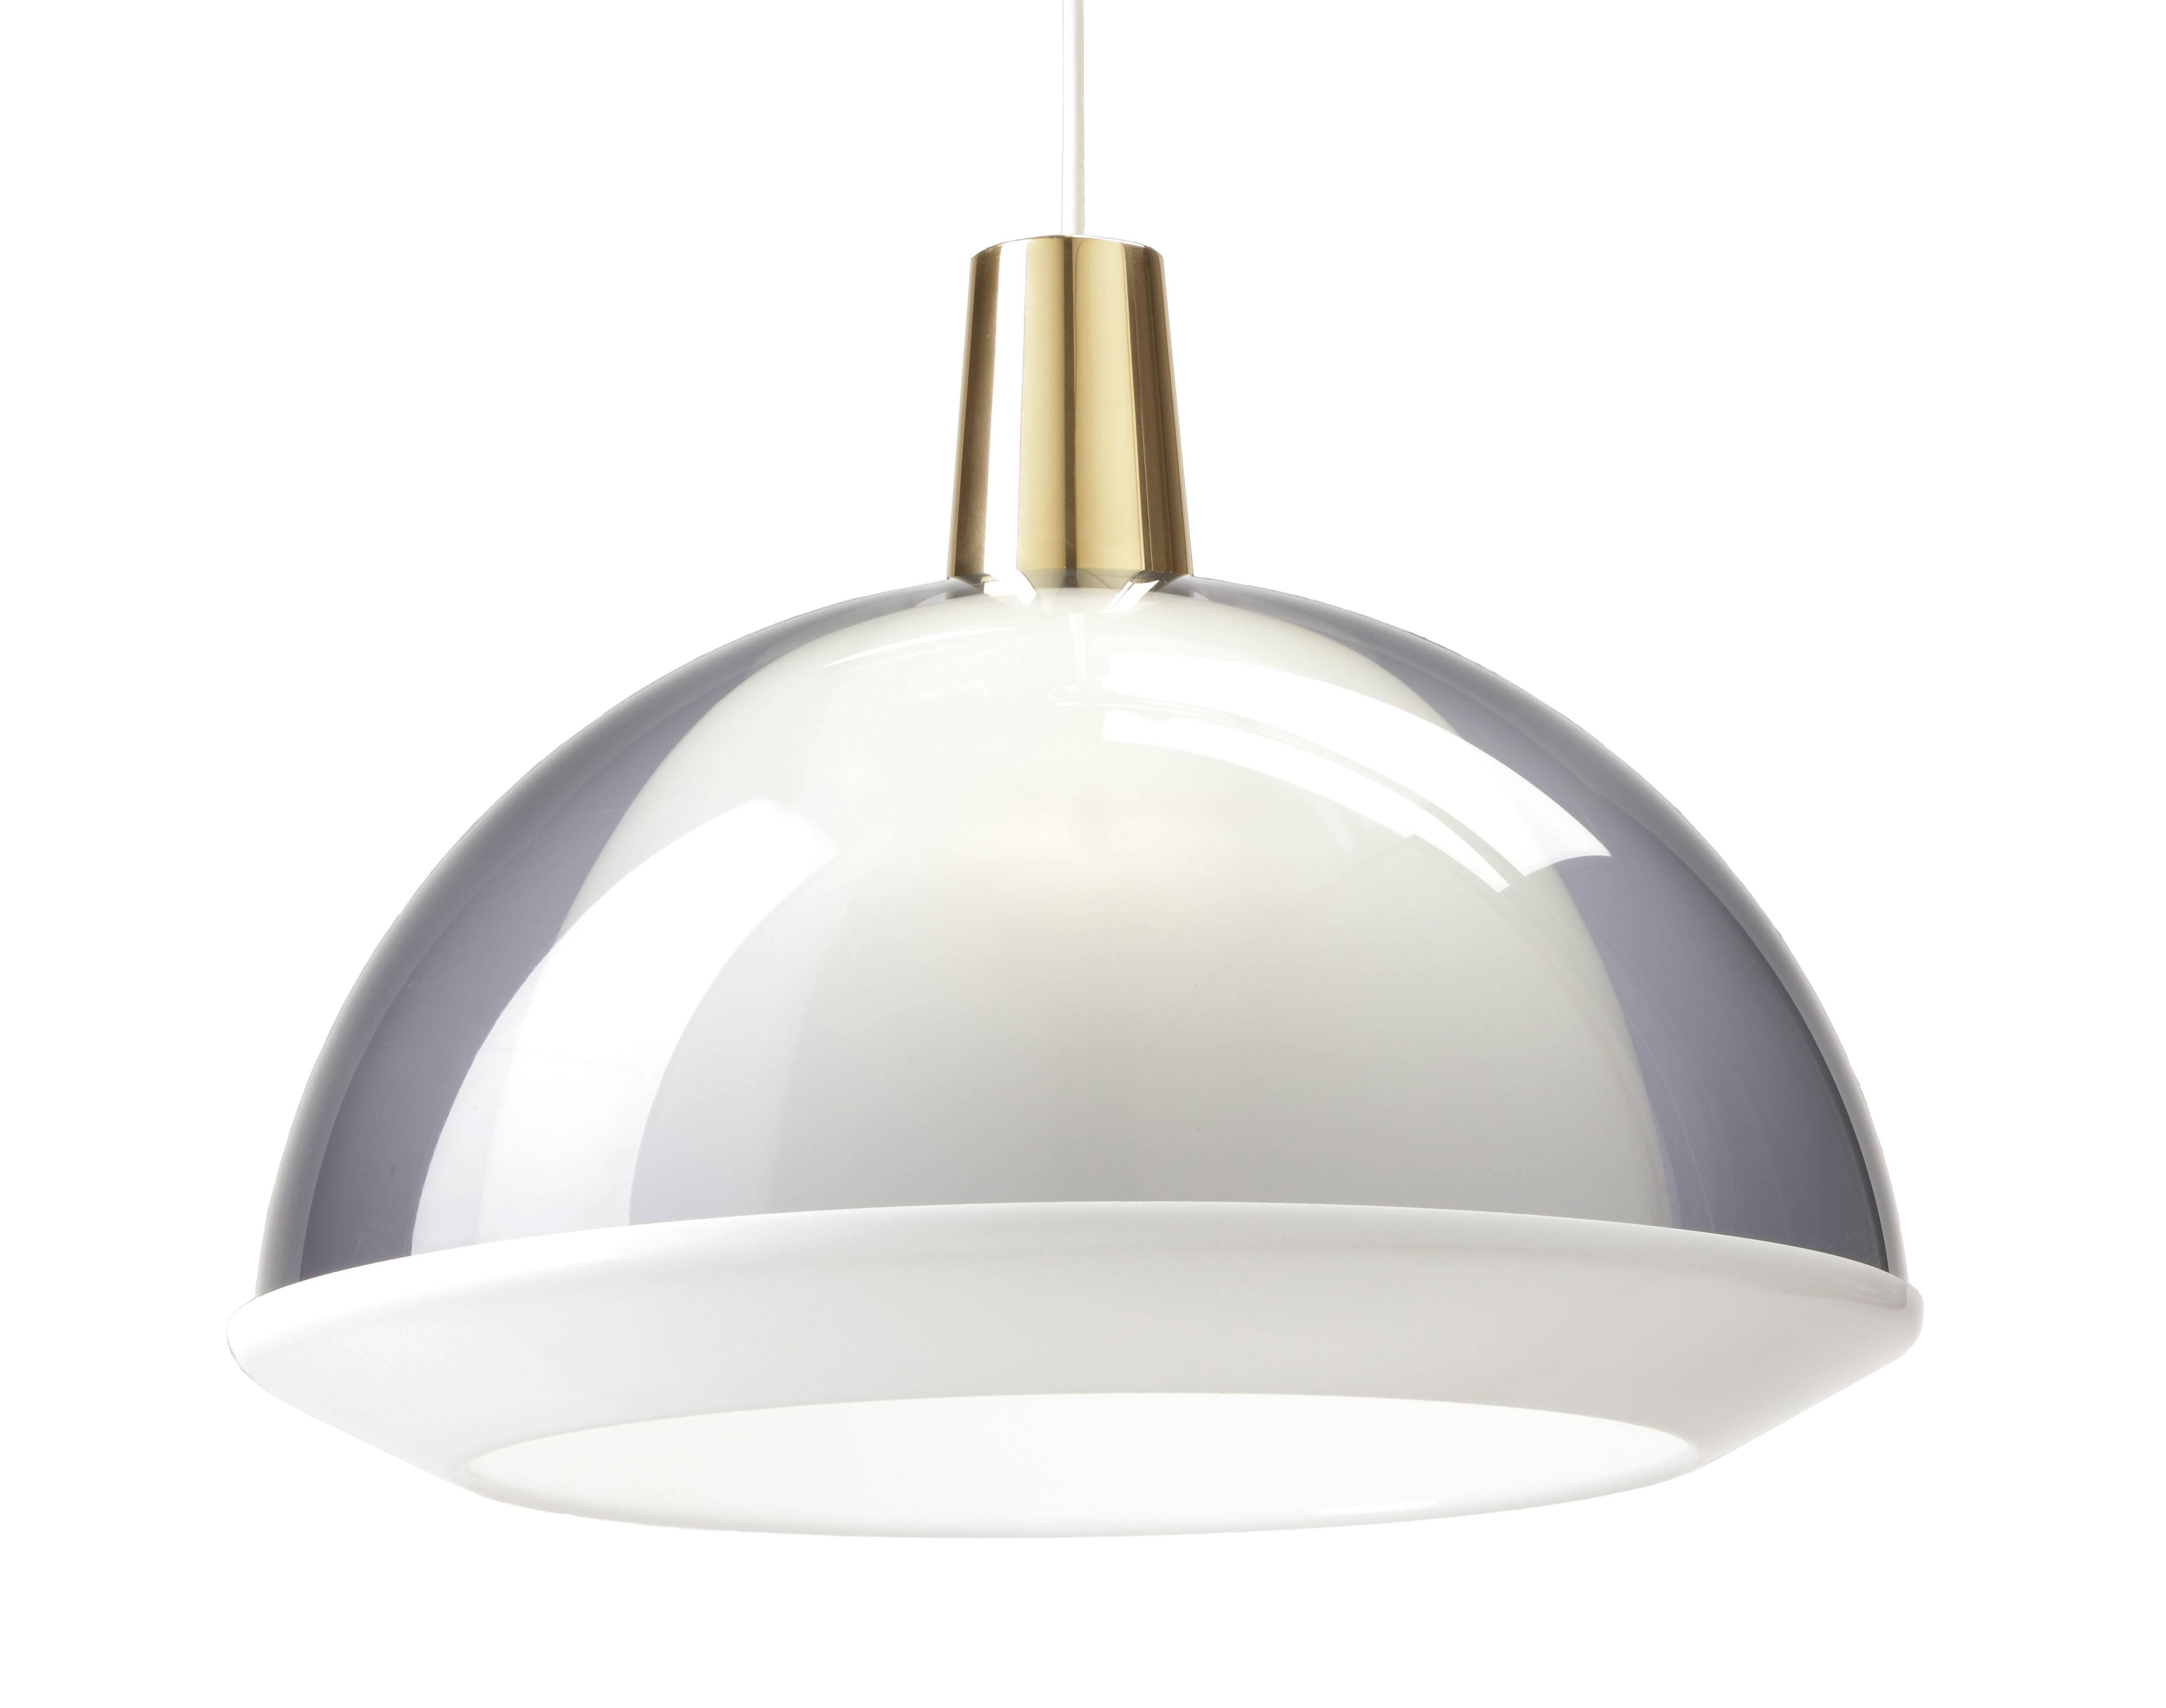 Yki Nummi 'Kuplat' Pendant for Innolux Oy, Finland. Designed in 1959, Nummi's iconic light consists of two acrylic shades of different colors, one nesting inside the other. The name Kuplat means bubbles in Finnish. As Nummi once astutely observed,